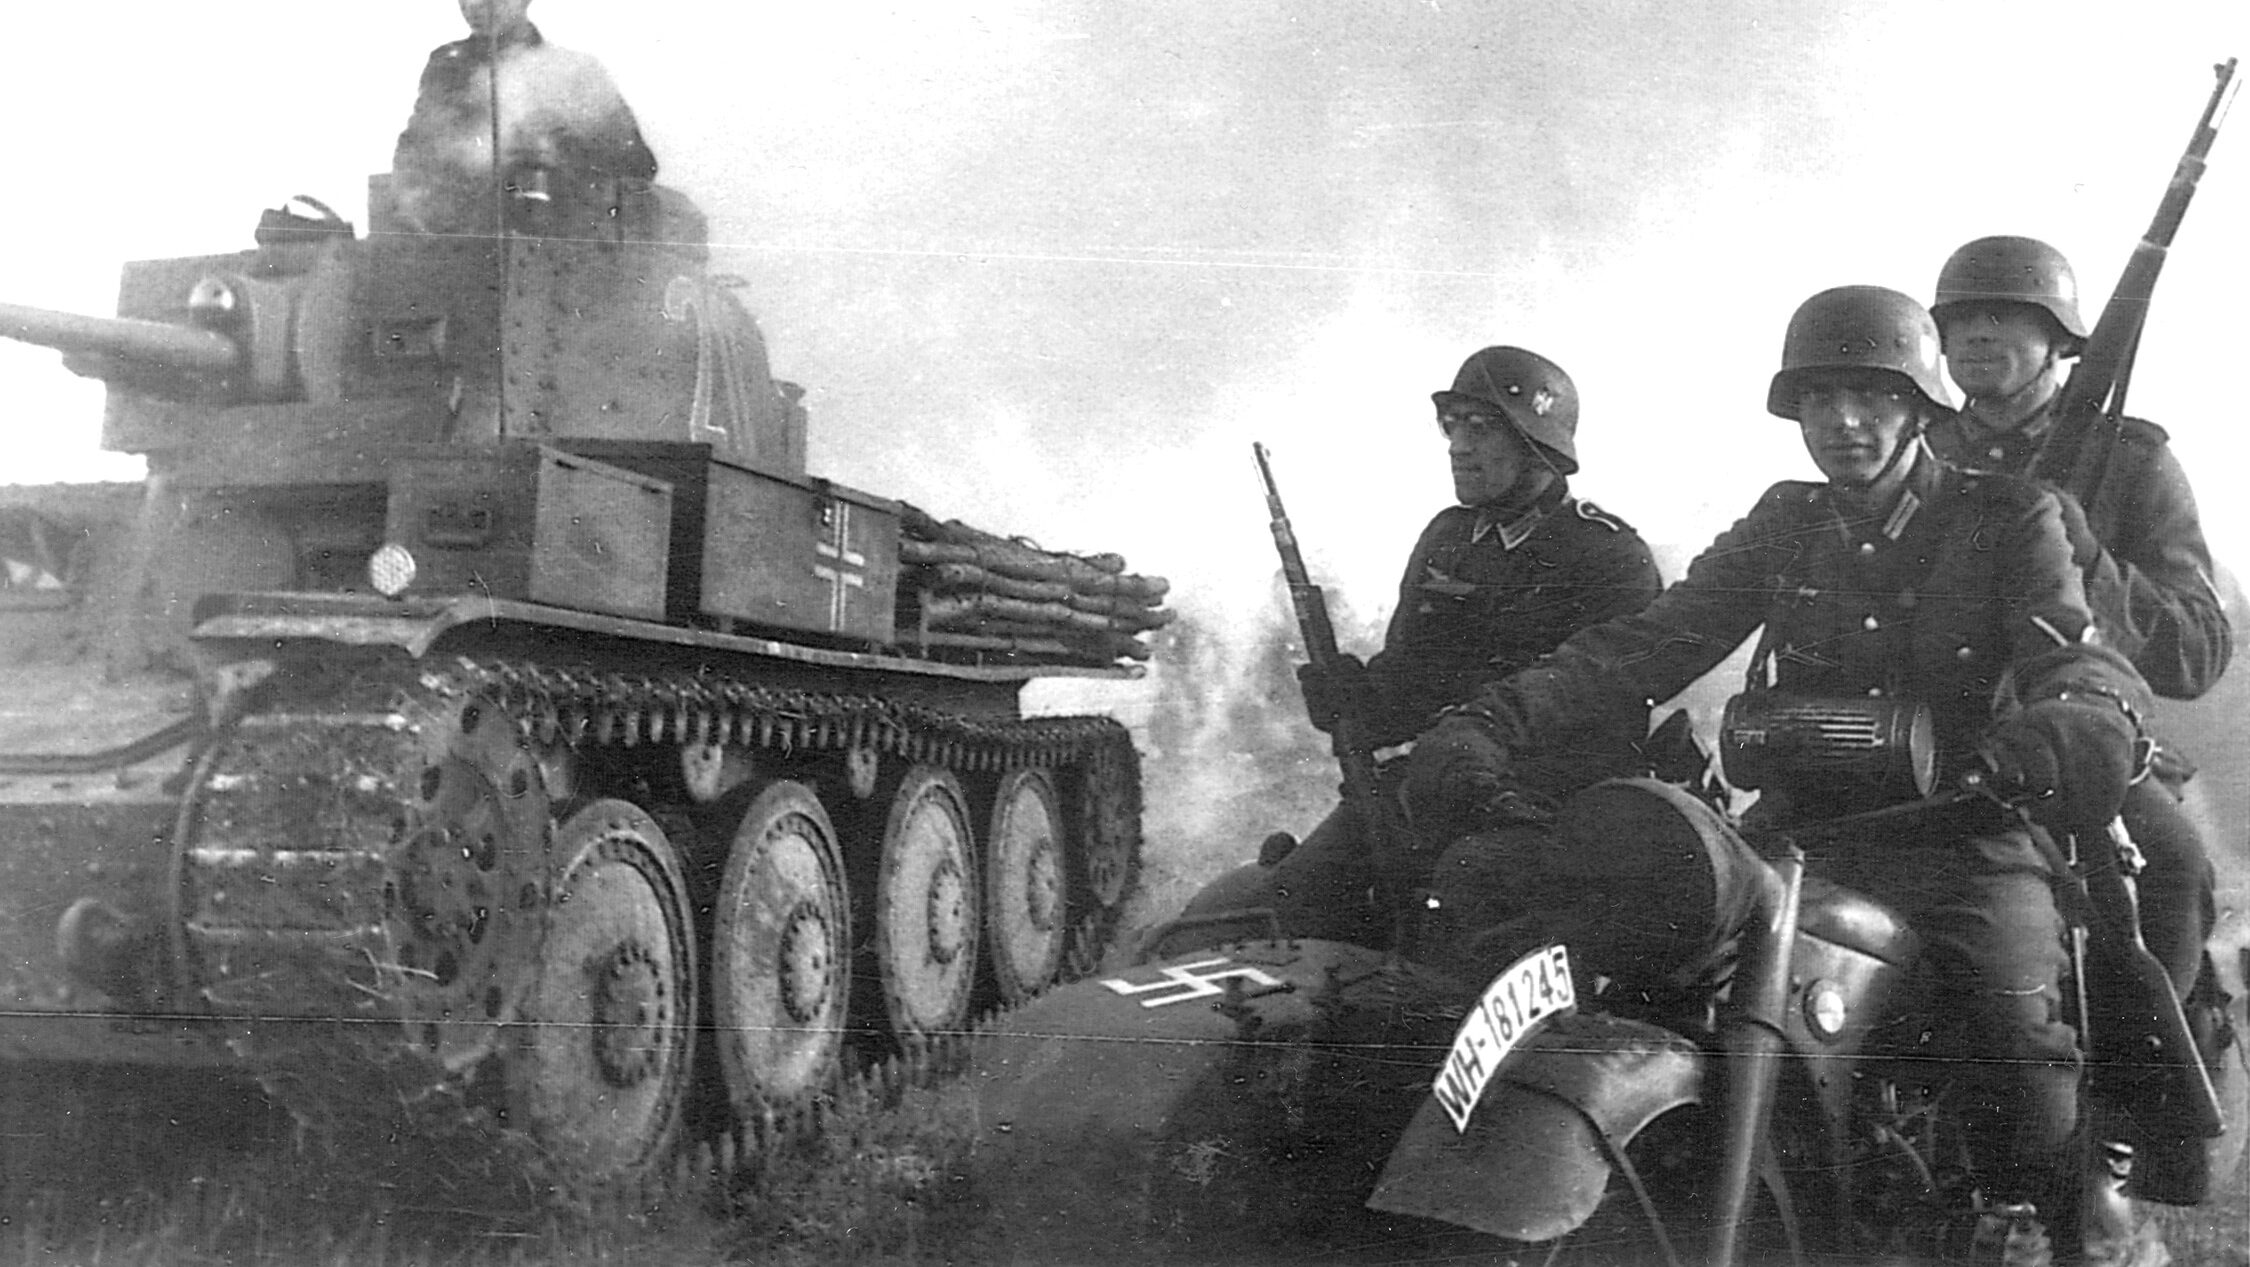 Early in the war, German troops advance in the company of a Czech-made tank and under cover of a smoke bomb they have ignited. The German occupation of Czechoslovakia provided the Wehrmacht with a windfall of military hardware.